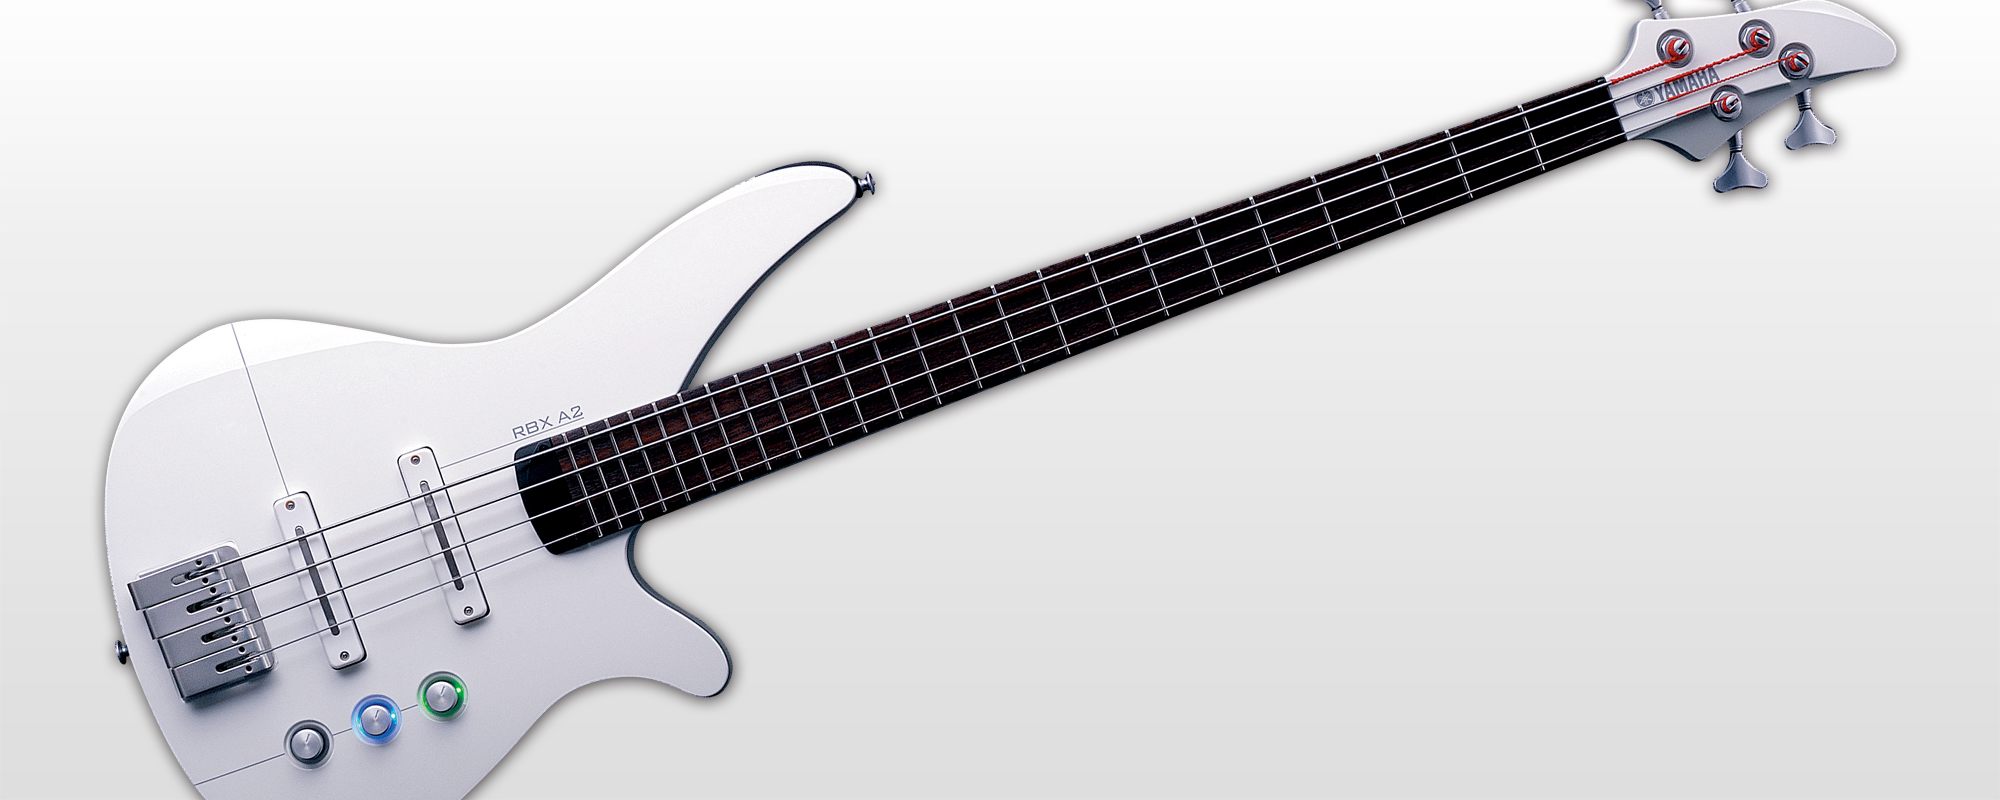 RBXA2 - Overview - Electric Basses - Guitars, Basses, & Amps 